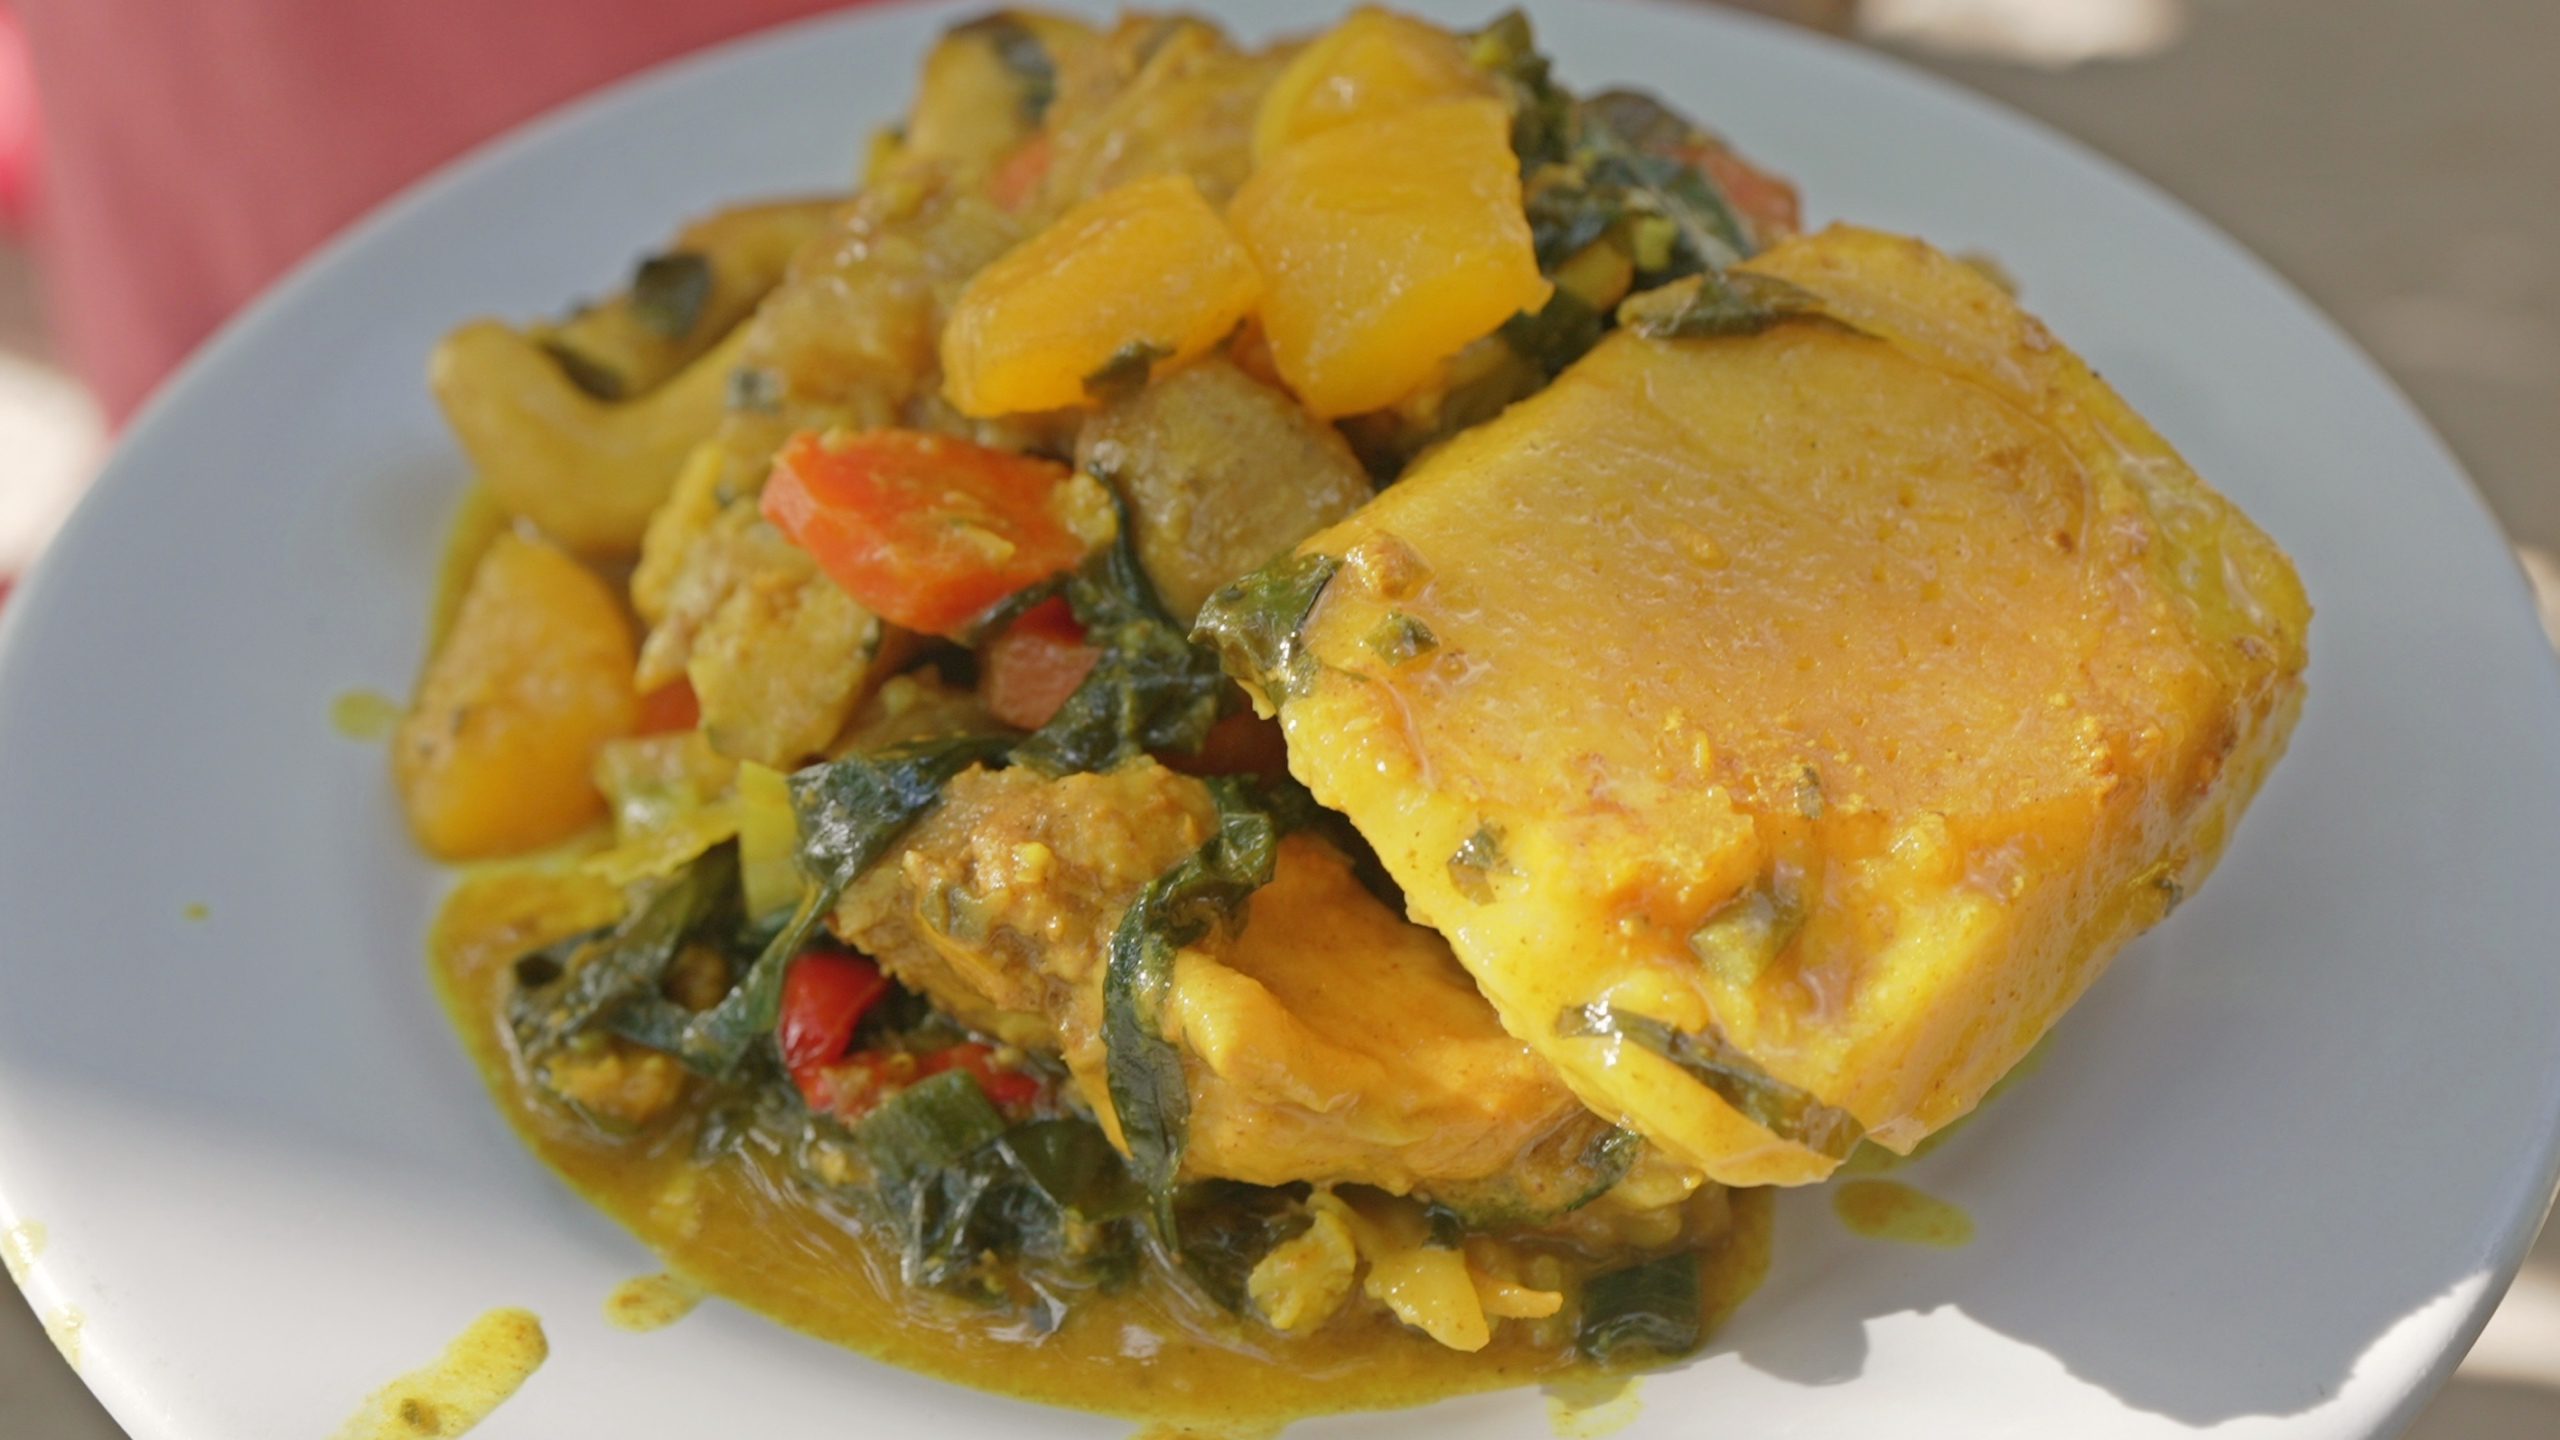 Oil down, the national dish of Grenada | David's Been Here